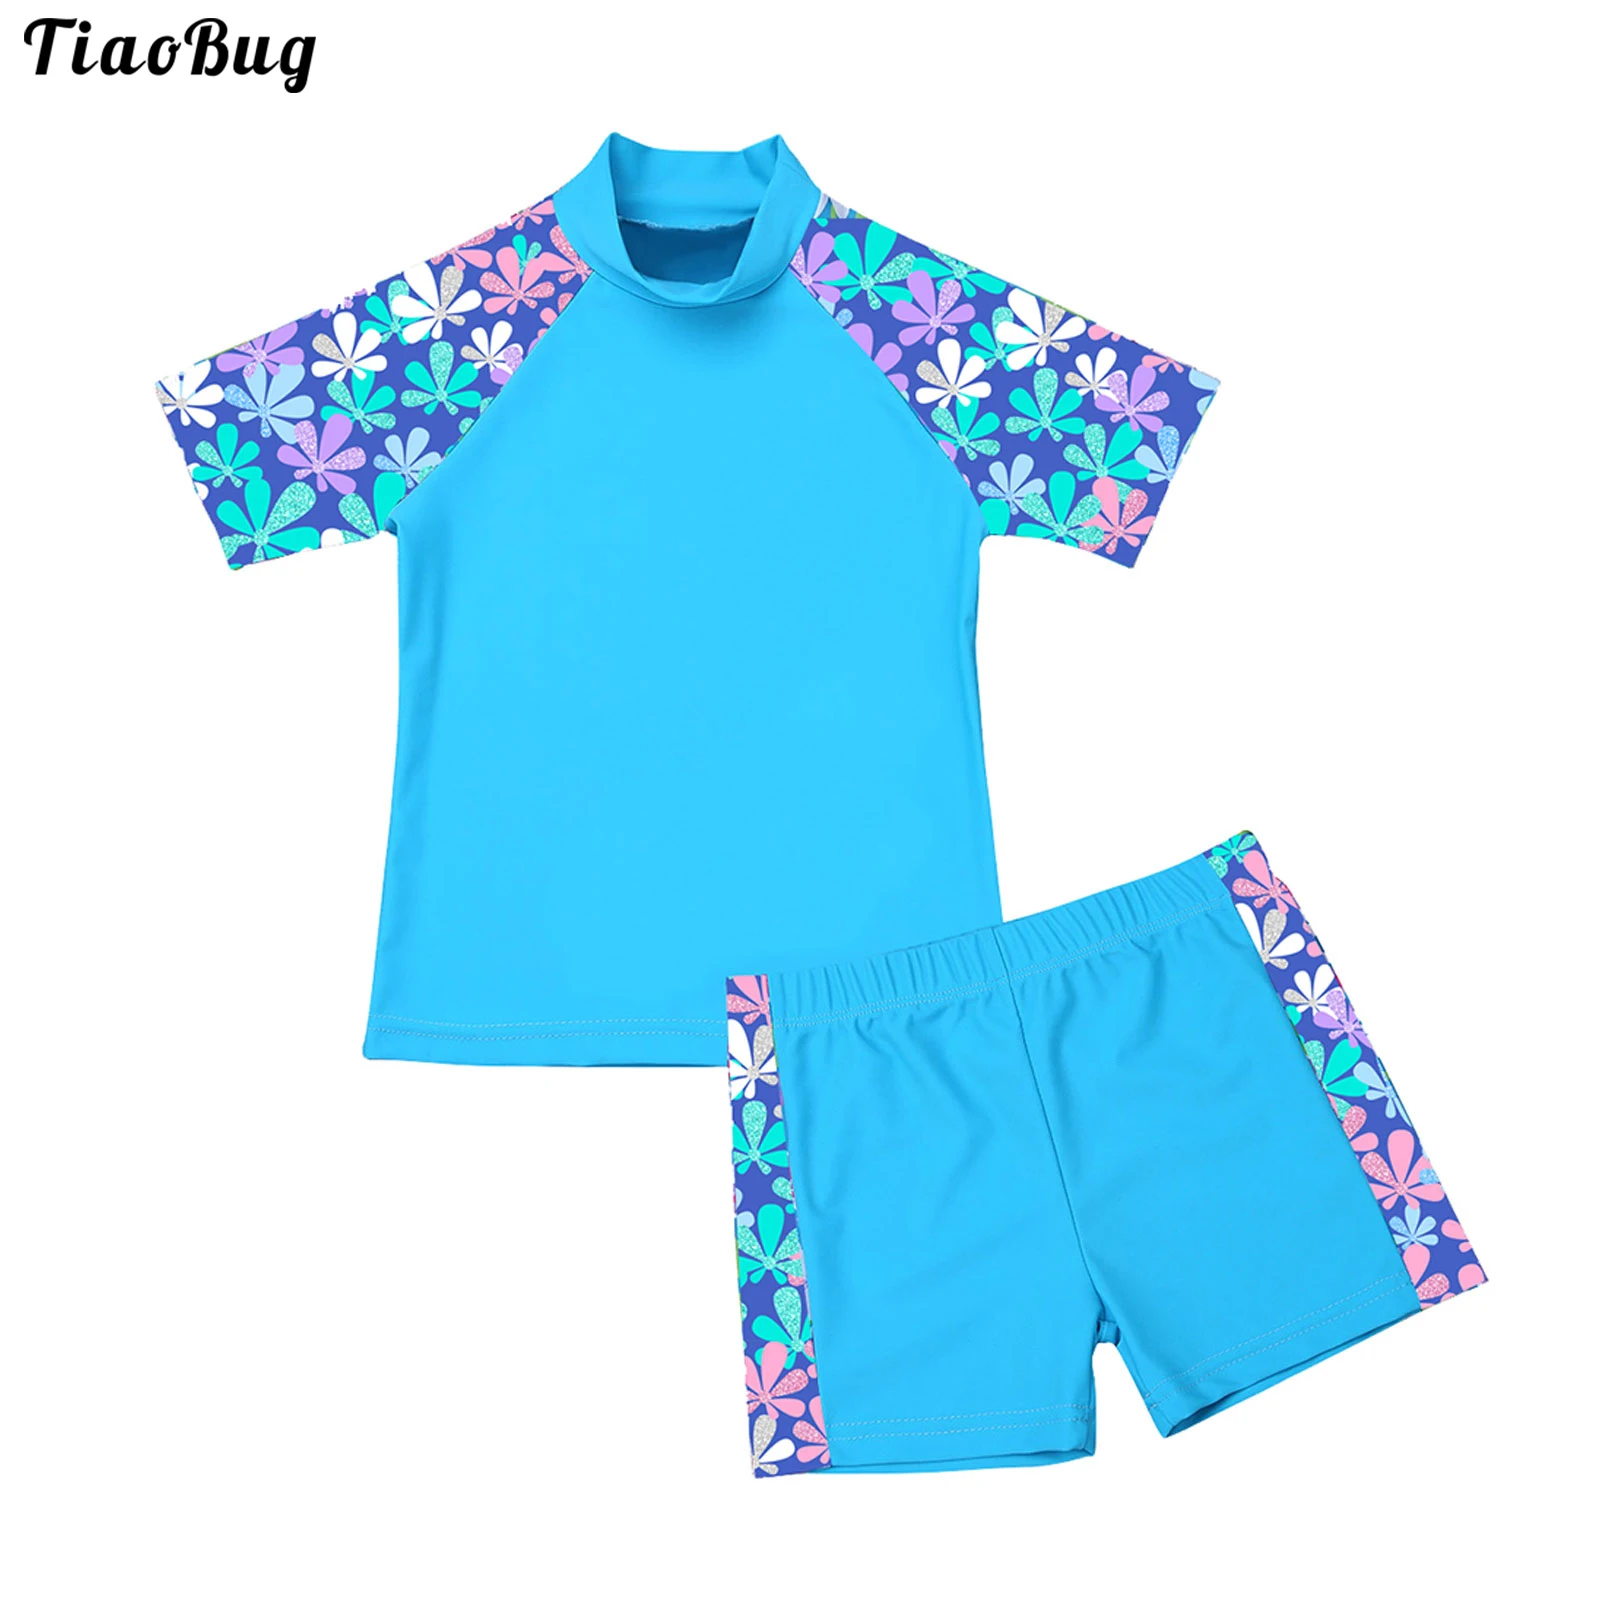 

TiaoBug 3 To 12 Years Summer 2Pcs Kids Girls Tankini Floral Printed Swimsuit Swimwear Tops With Bottoms Bathing Suit